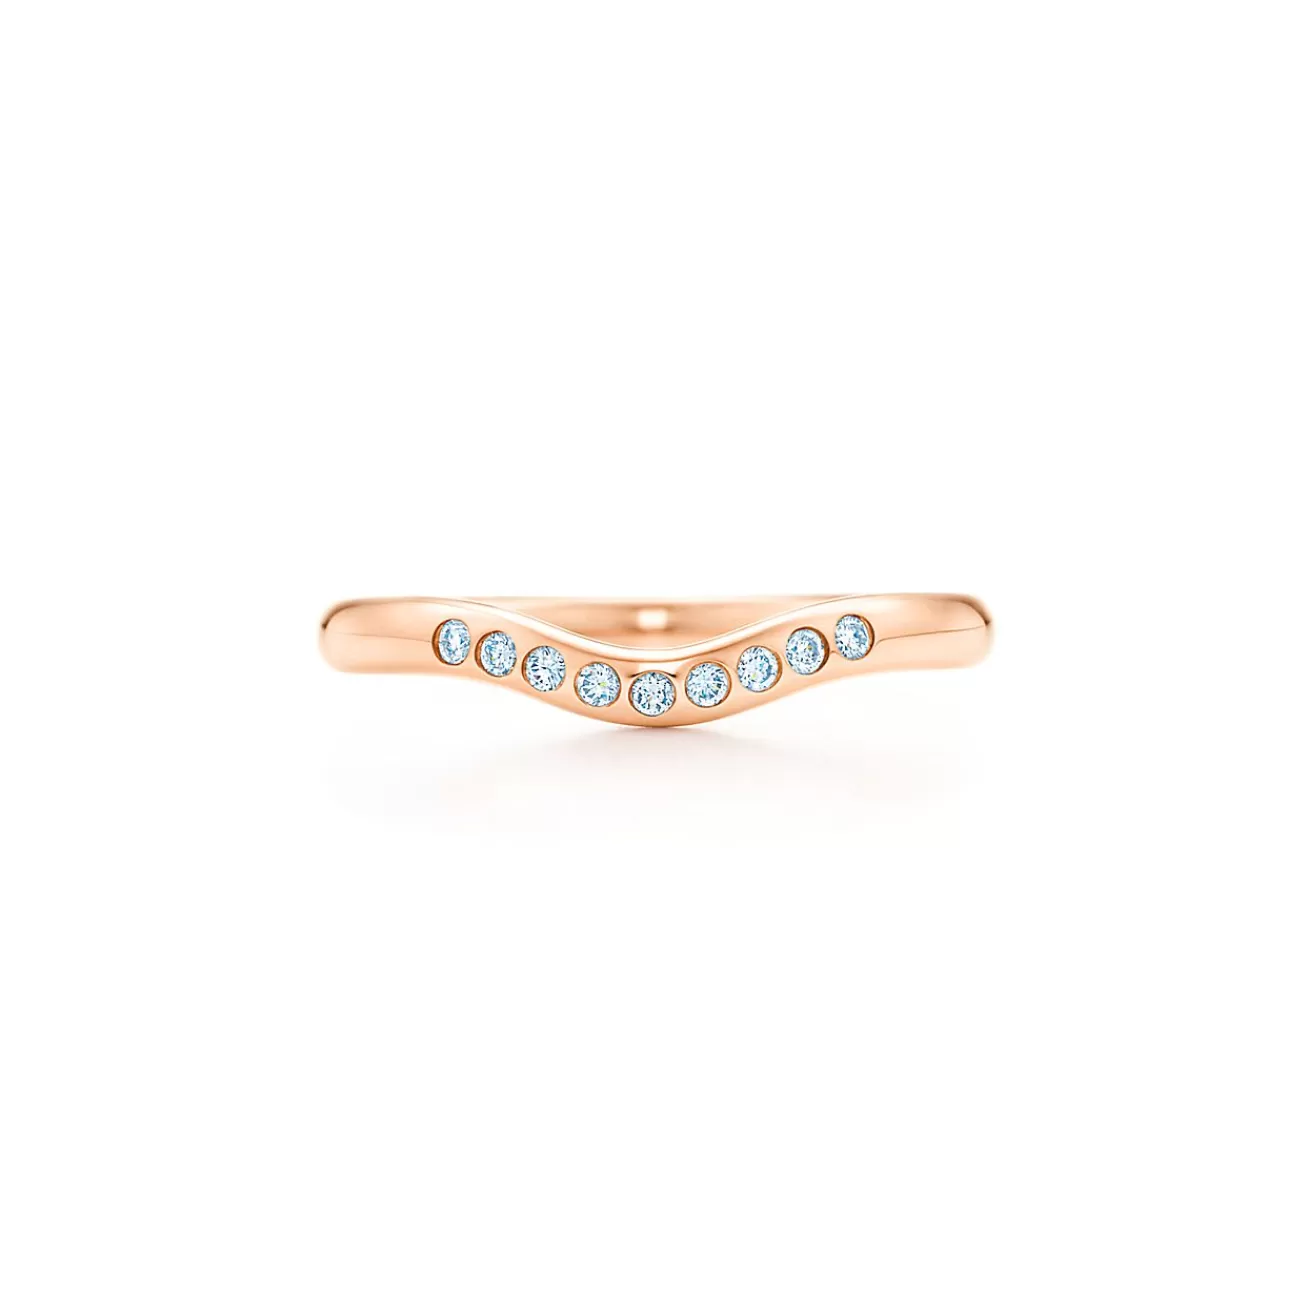 Tiffany & Co. Elsa Peretti® wedding band in 18k rose gold with diamonds, 2 mm wide. | ^ Rings | Rose Gold Jewelry